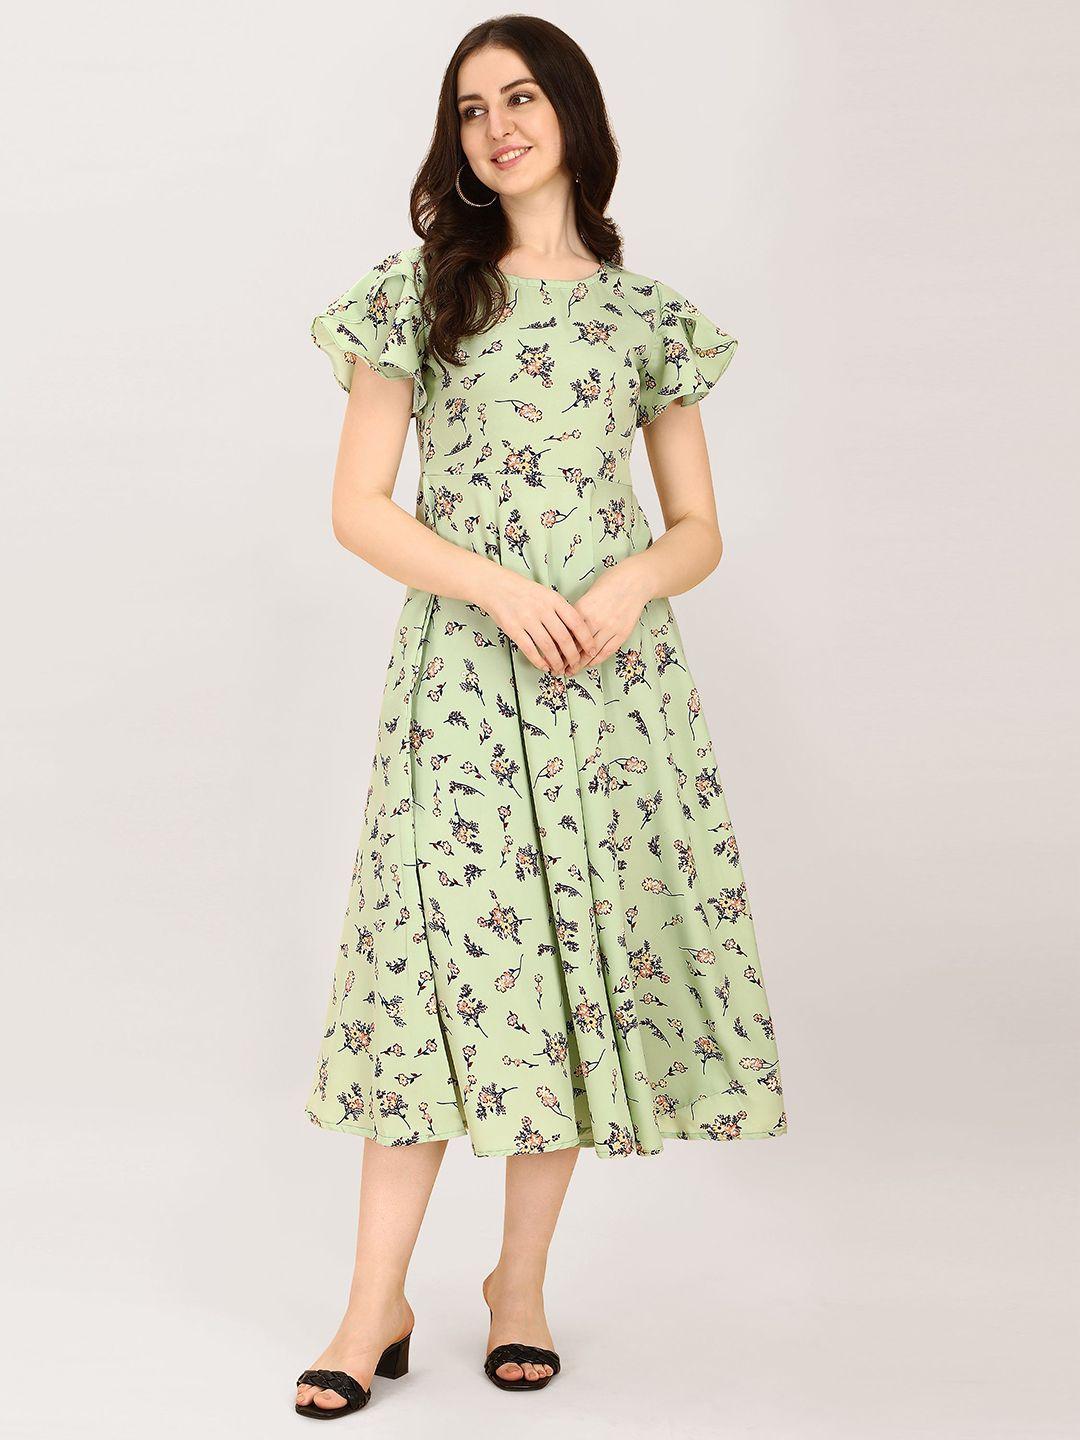 baesd floral printed round neck flared sleeves a-line dress